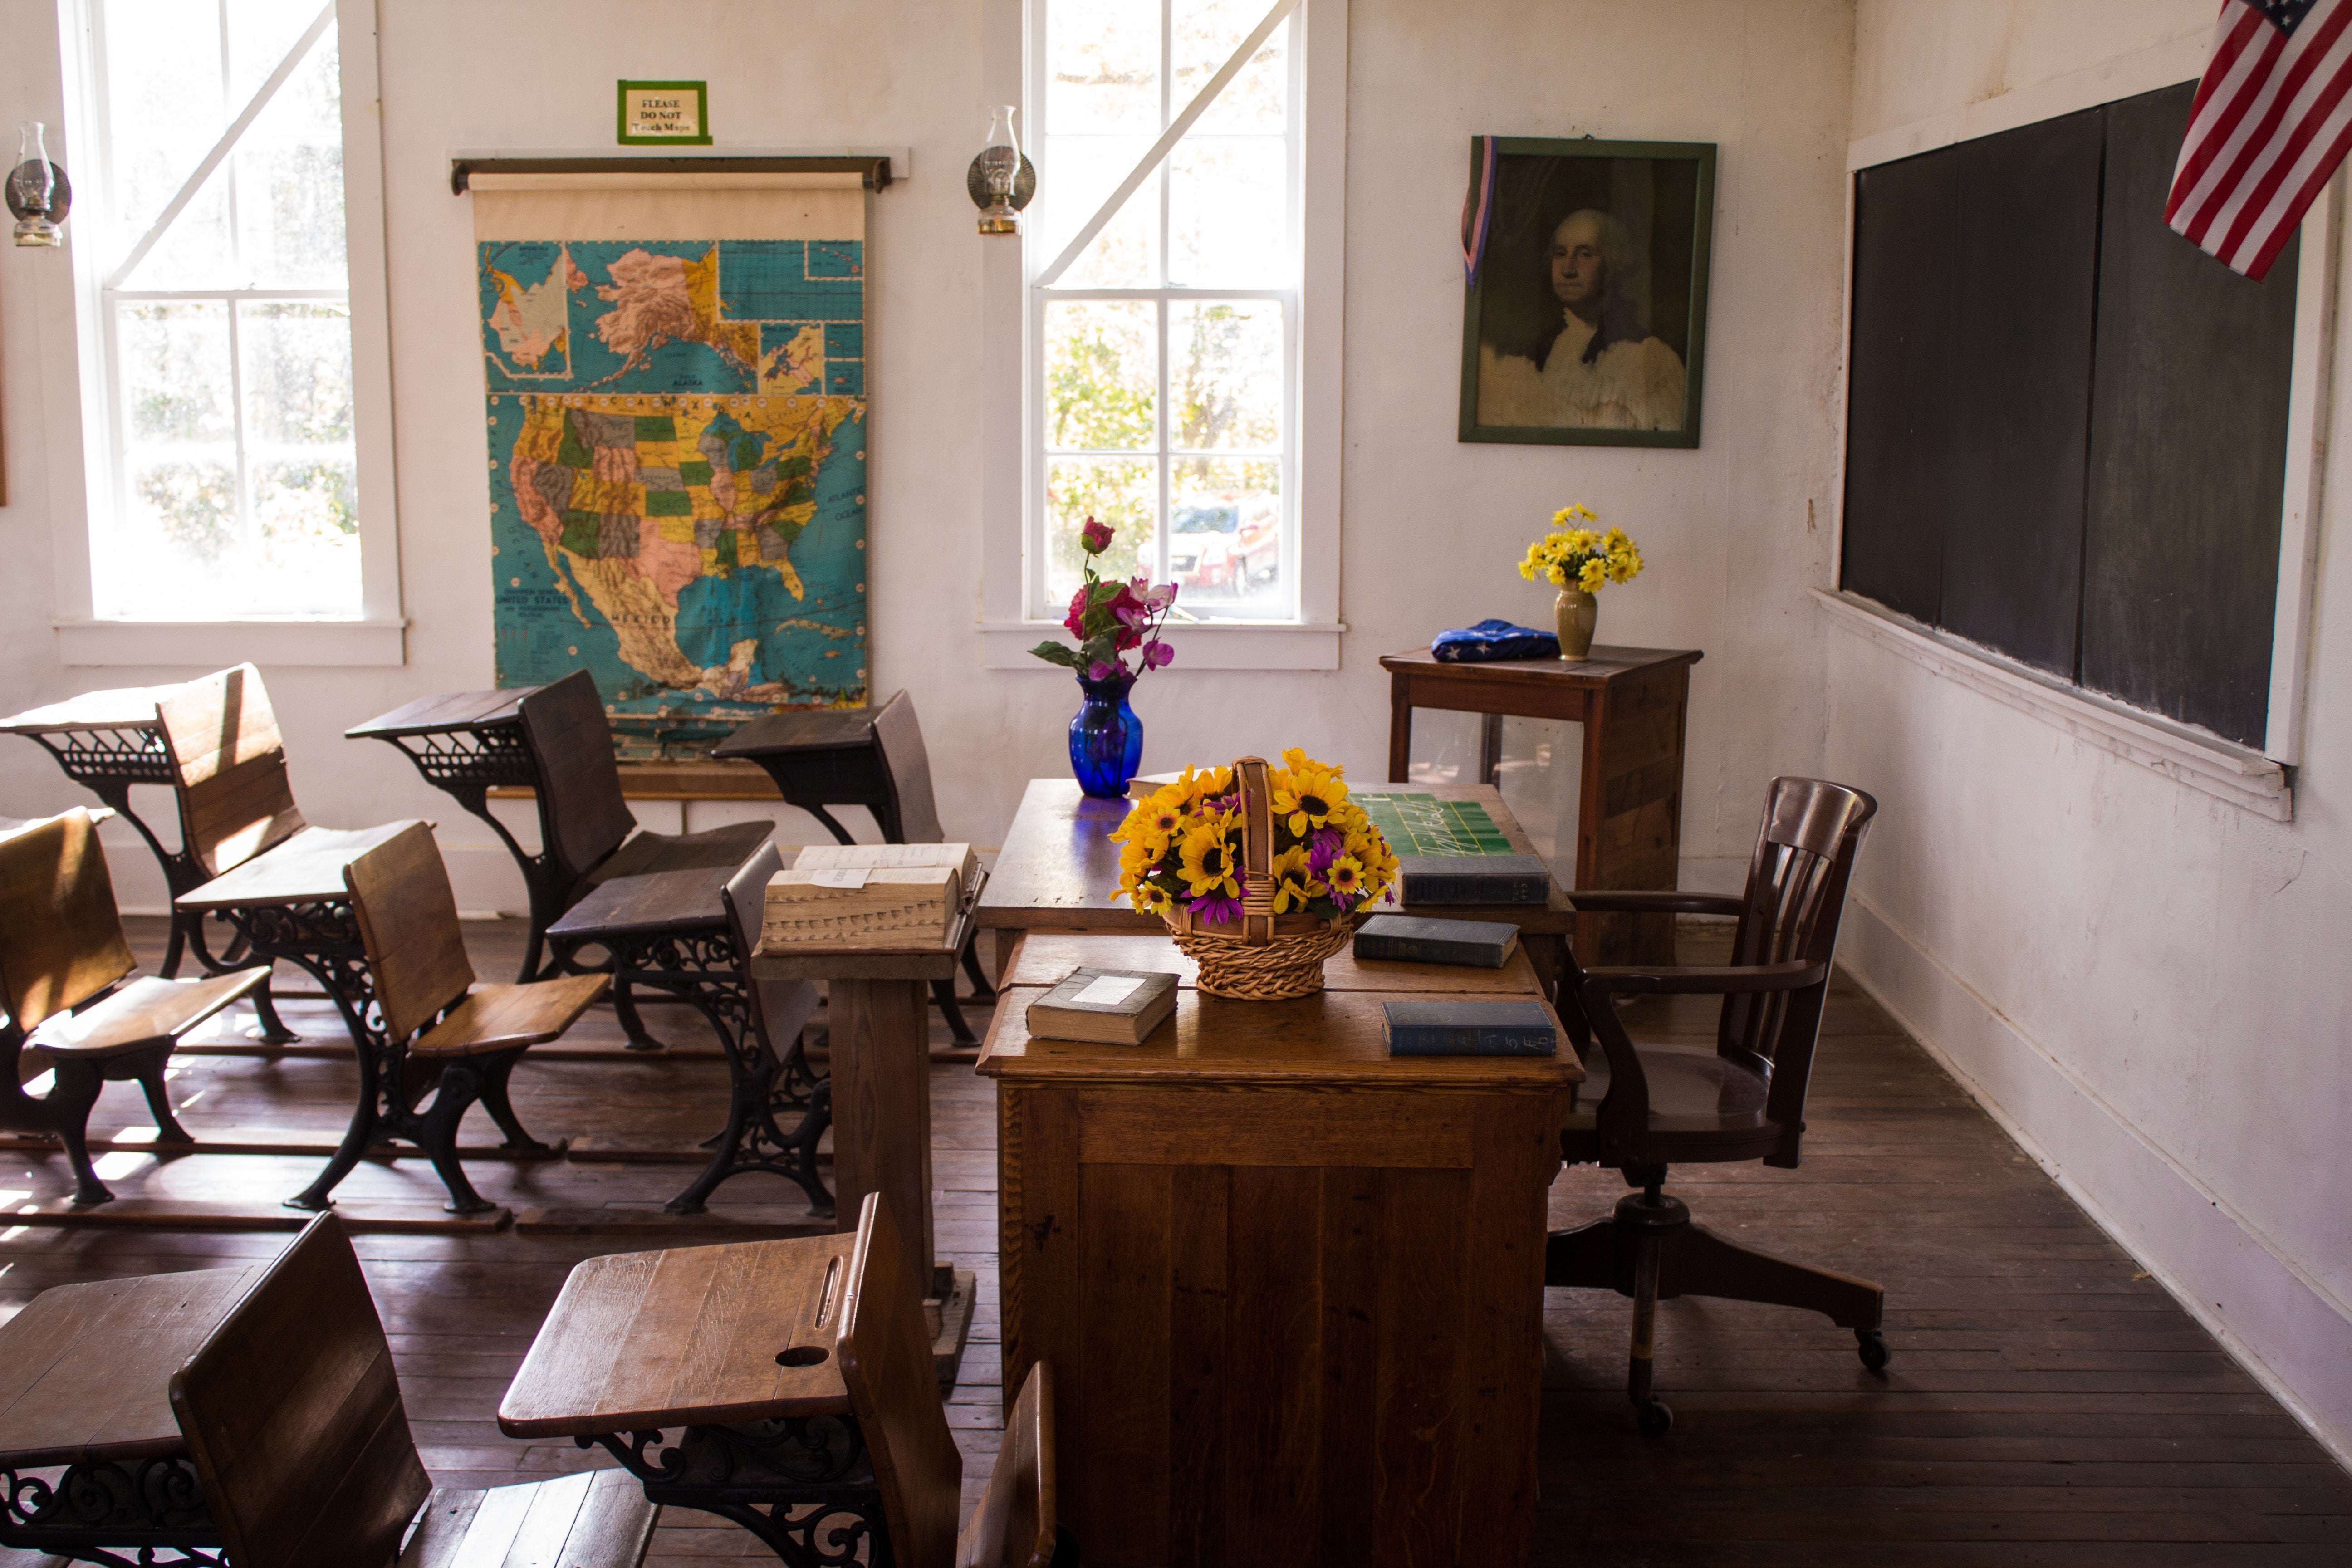 A classroom with a U.S. map on the wall and an American flag above the blackboard.